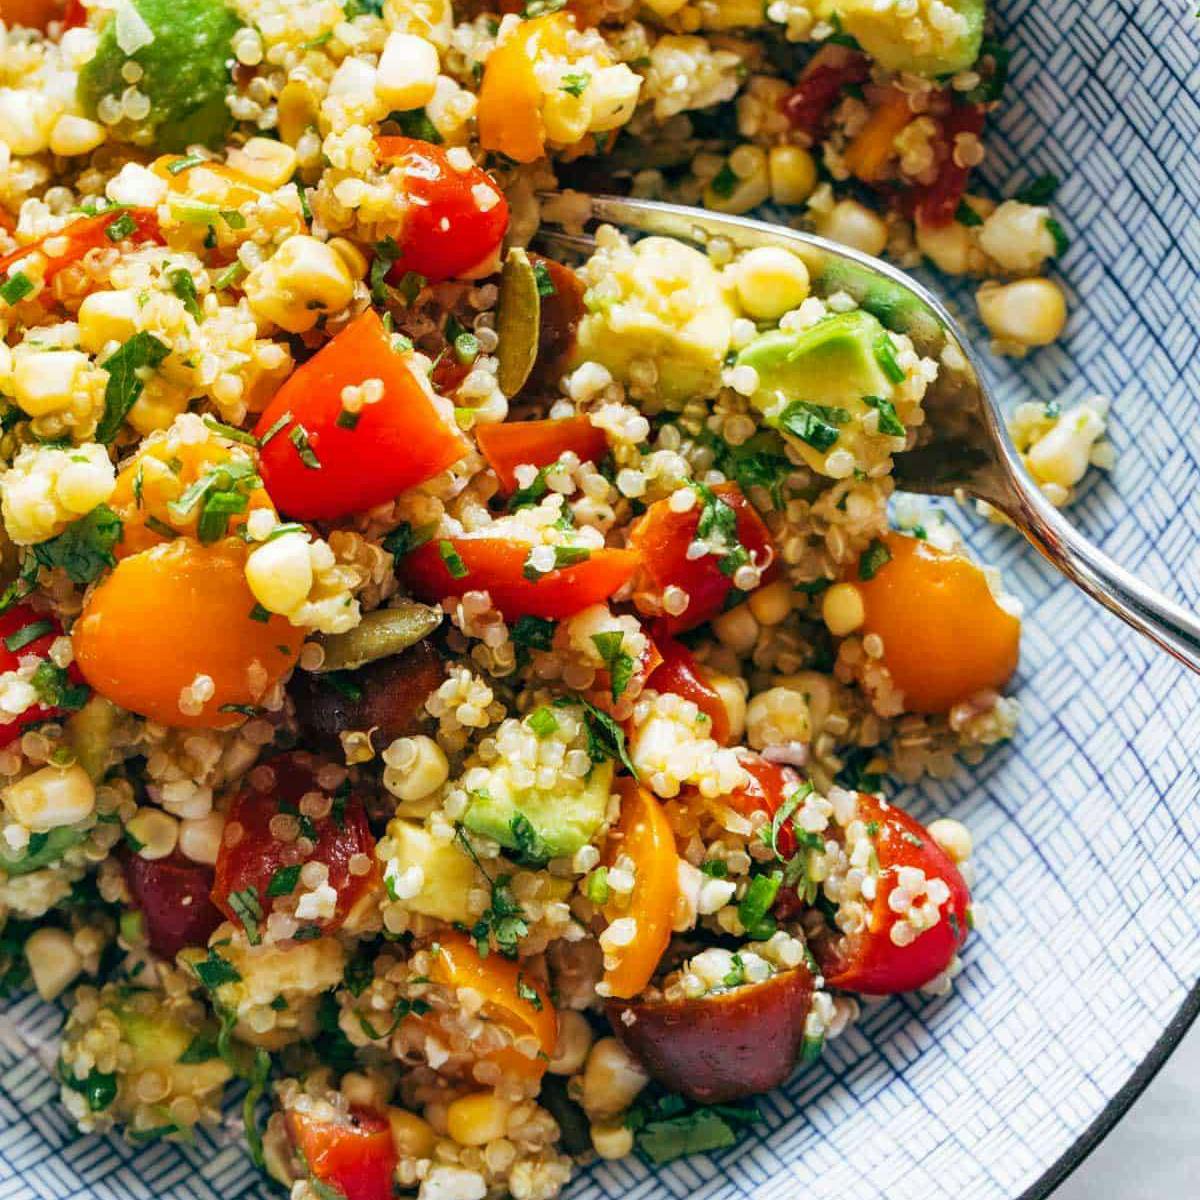 Corn and avocado salad with quinoa and tomatoes in a bowl